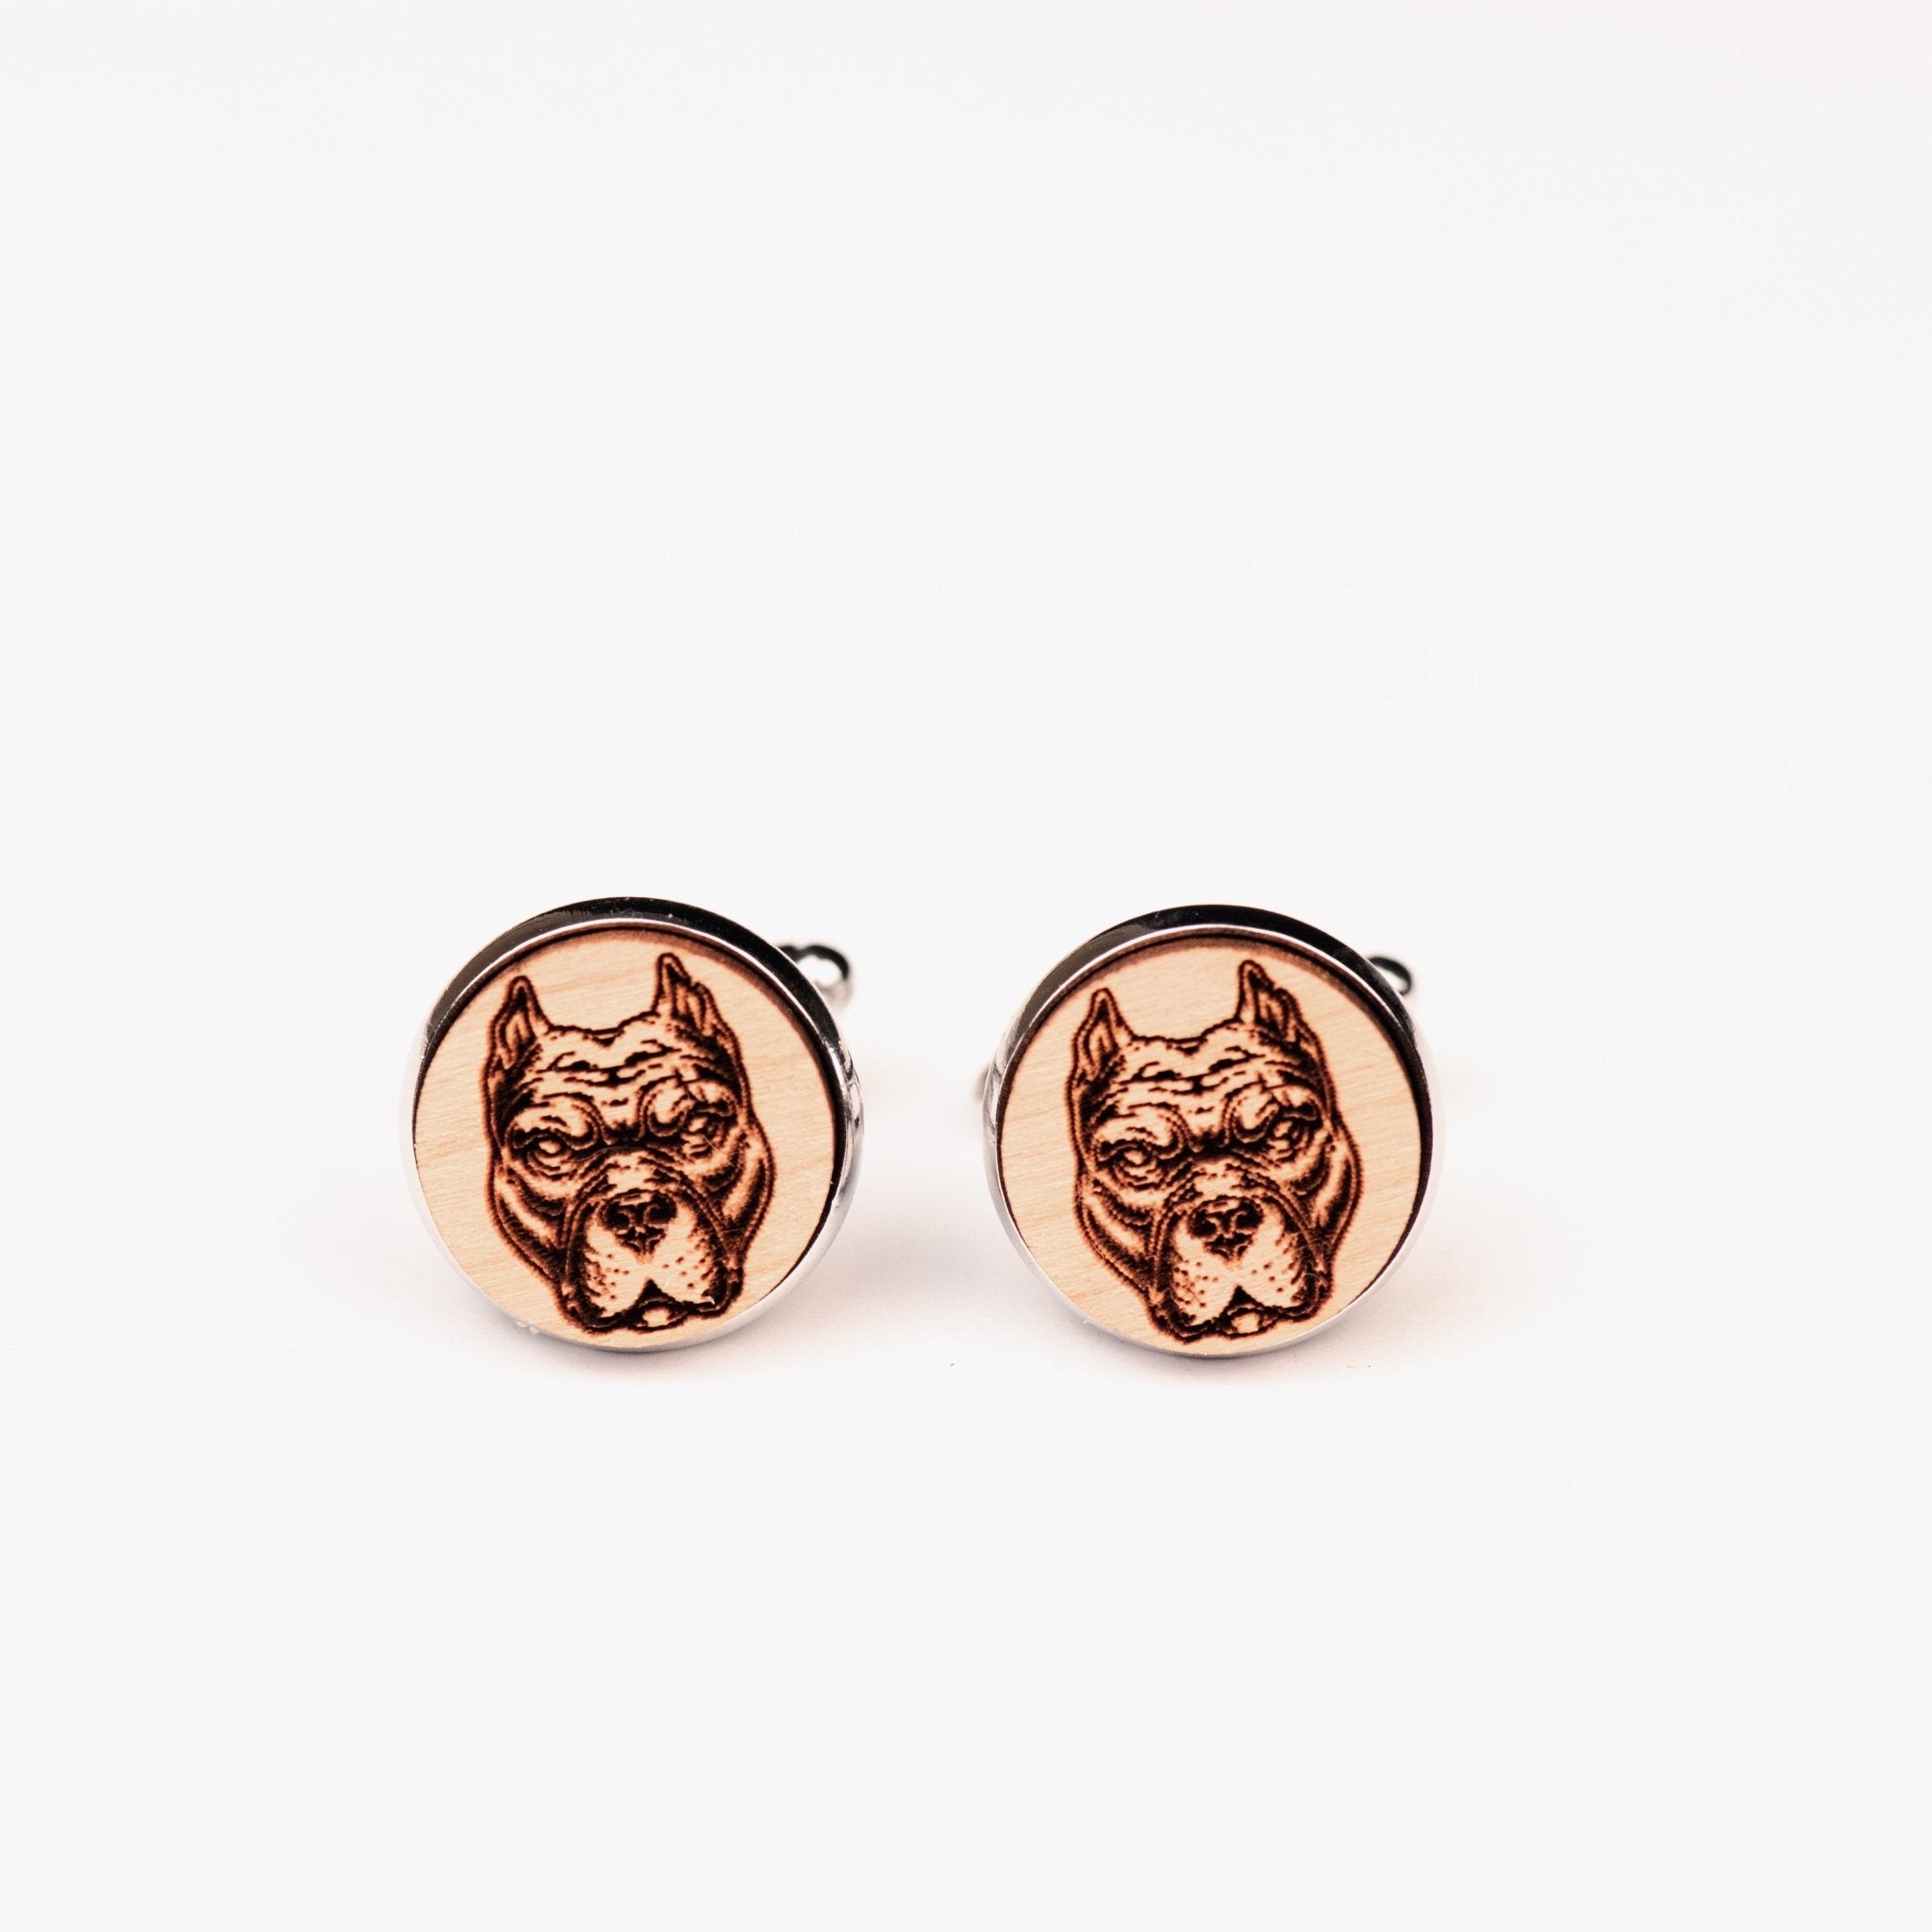 Pit Bull Dog Cherry Wood Cufflinks - CL30149 - Robin Valley Official Store